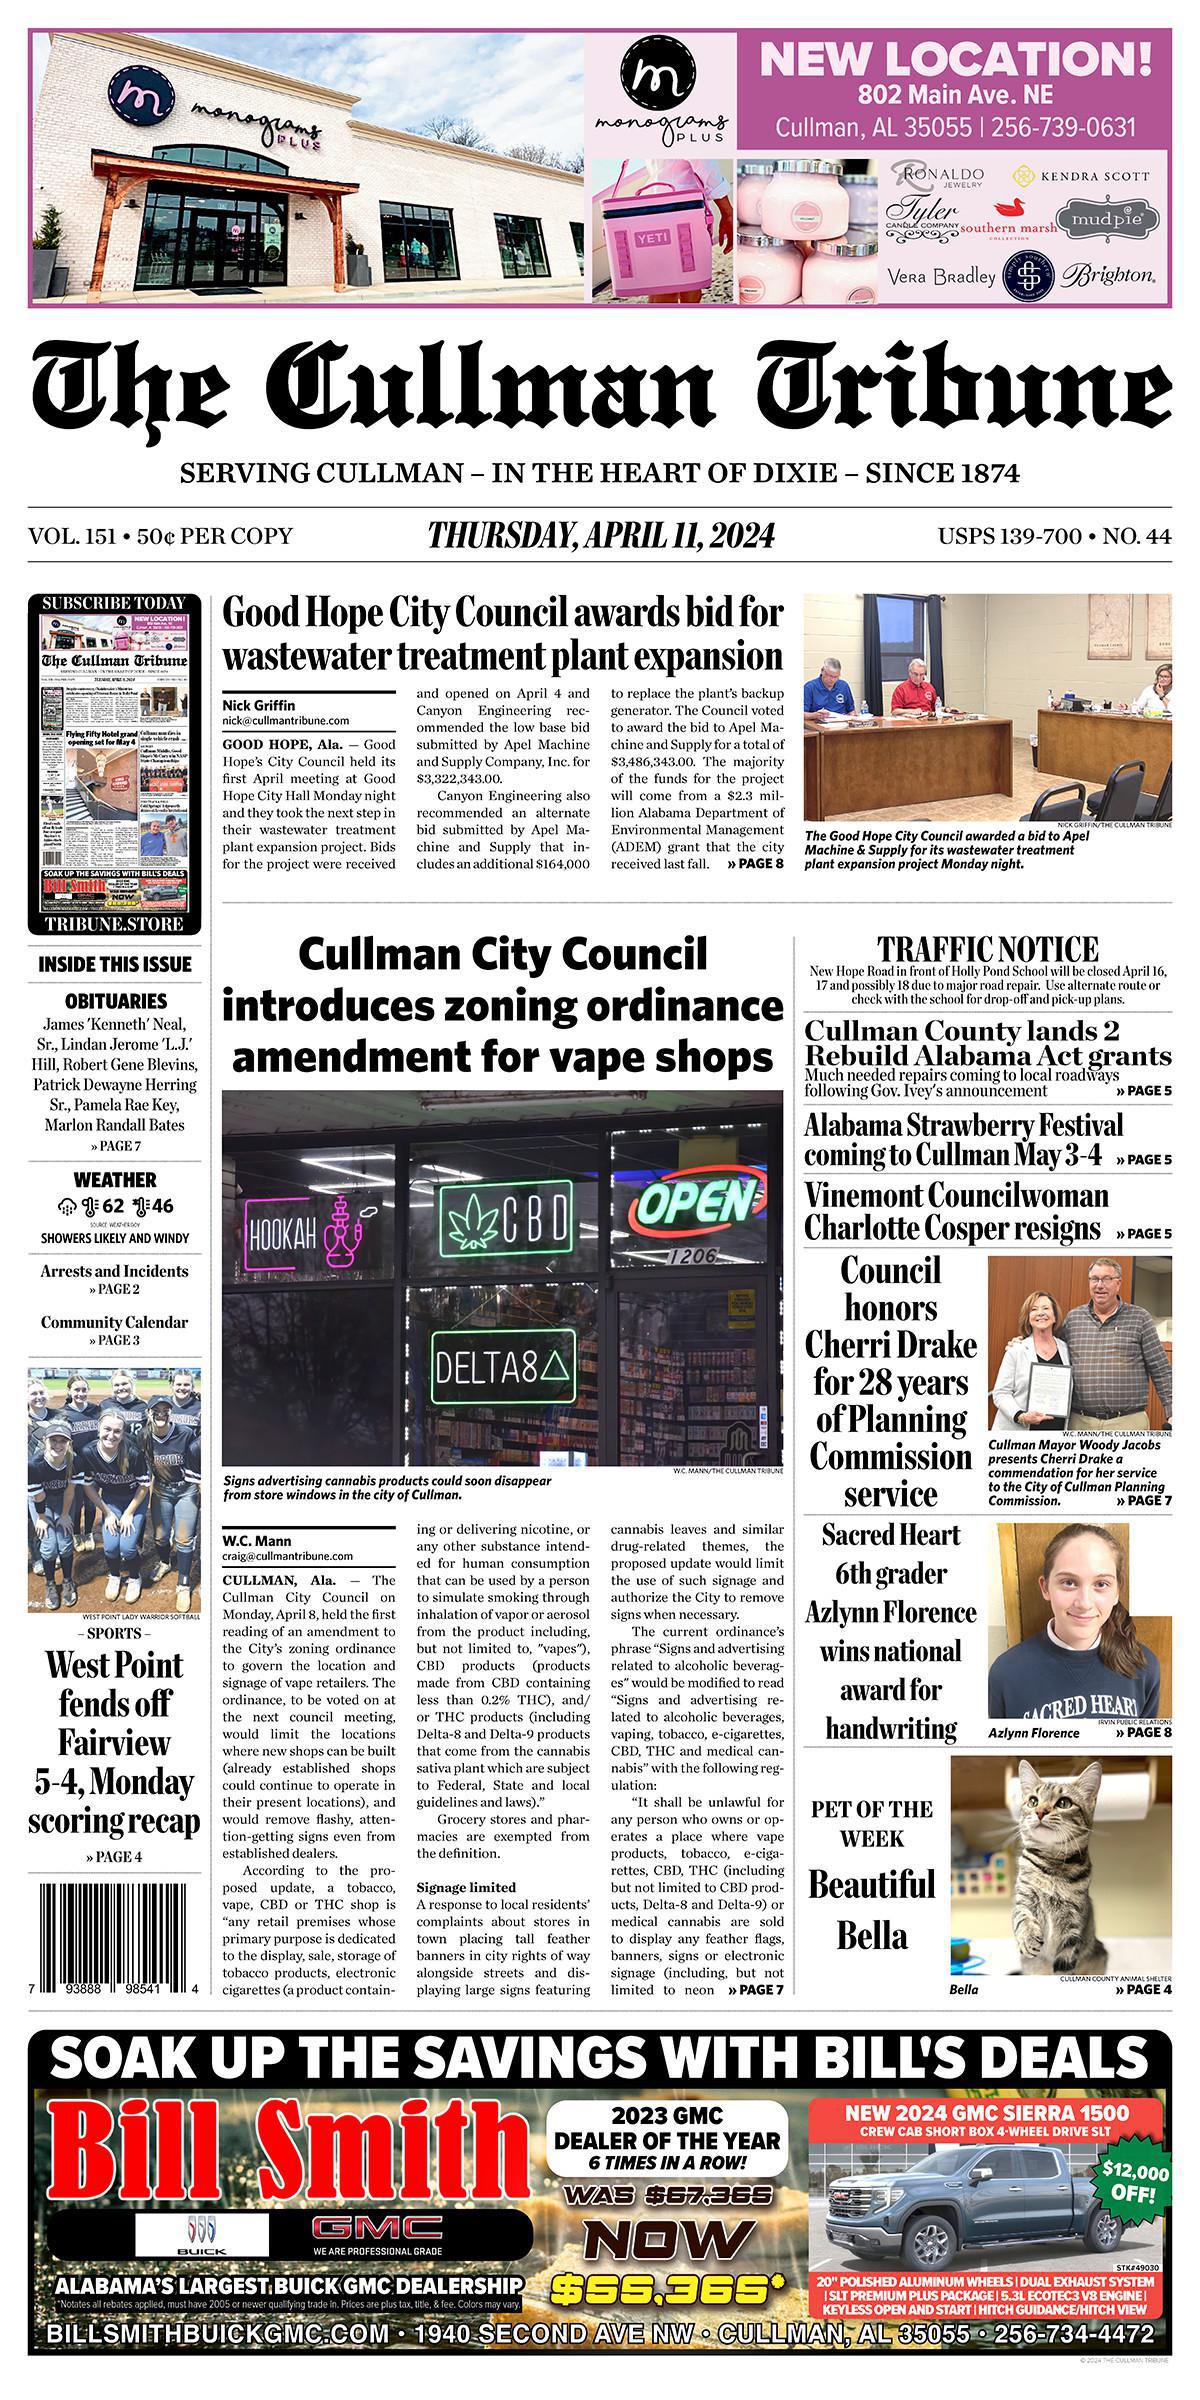 Good Morning Cullman! The 04-11-2024 edition of the Cullman Tribune is now ready to view.